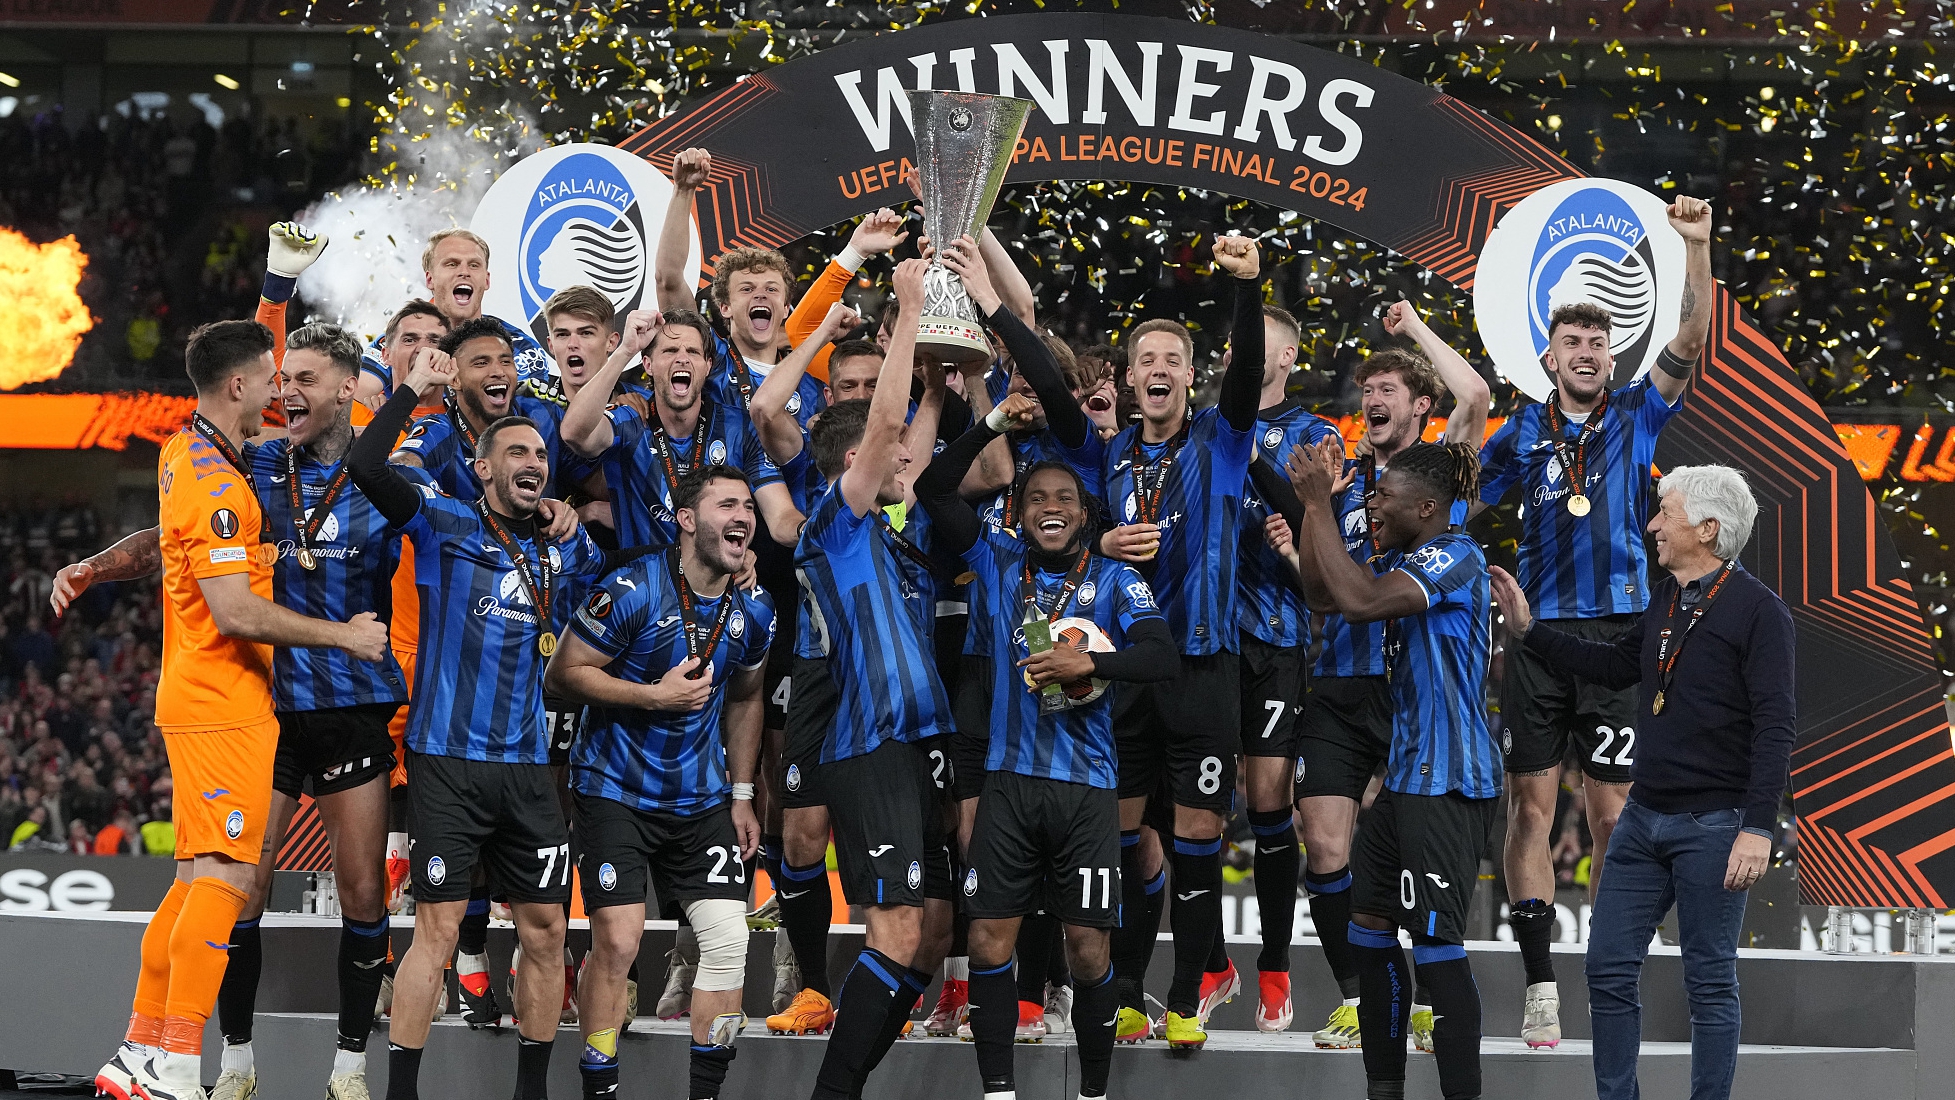 Atalanta's players celebrate with the trophy after winning the Europa League final at the Aviva Stadium in Dublin, Ireland, May 22, 2024. /CFP